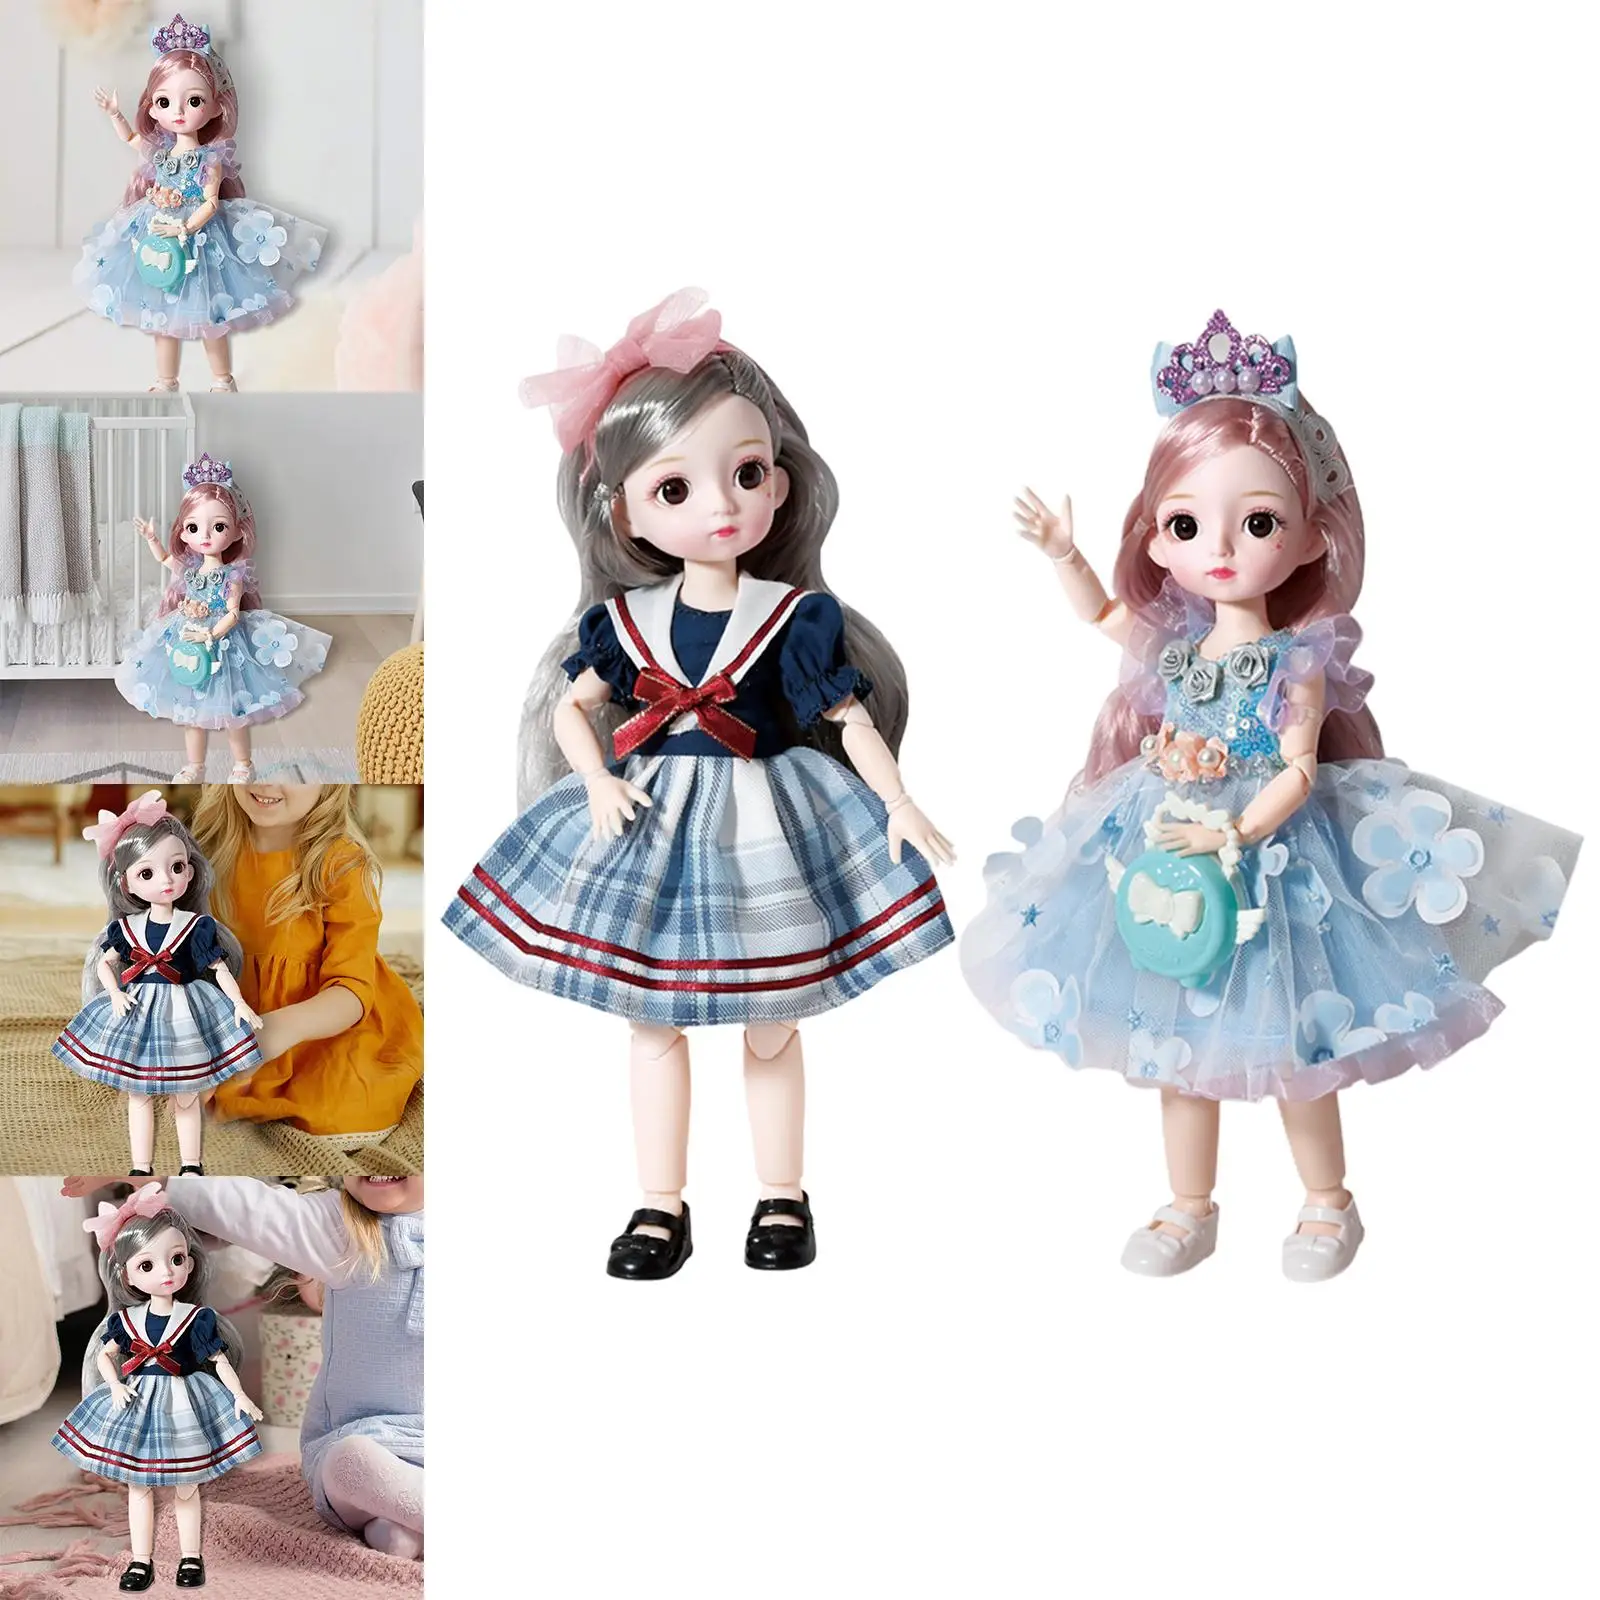 1/6 Fashion Doll Long Hair 23 Moveable Joints with Clothes and Shoes Dress Fashion Outfits Princess Doll Toy for Party